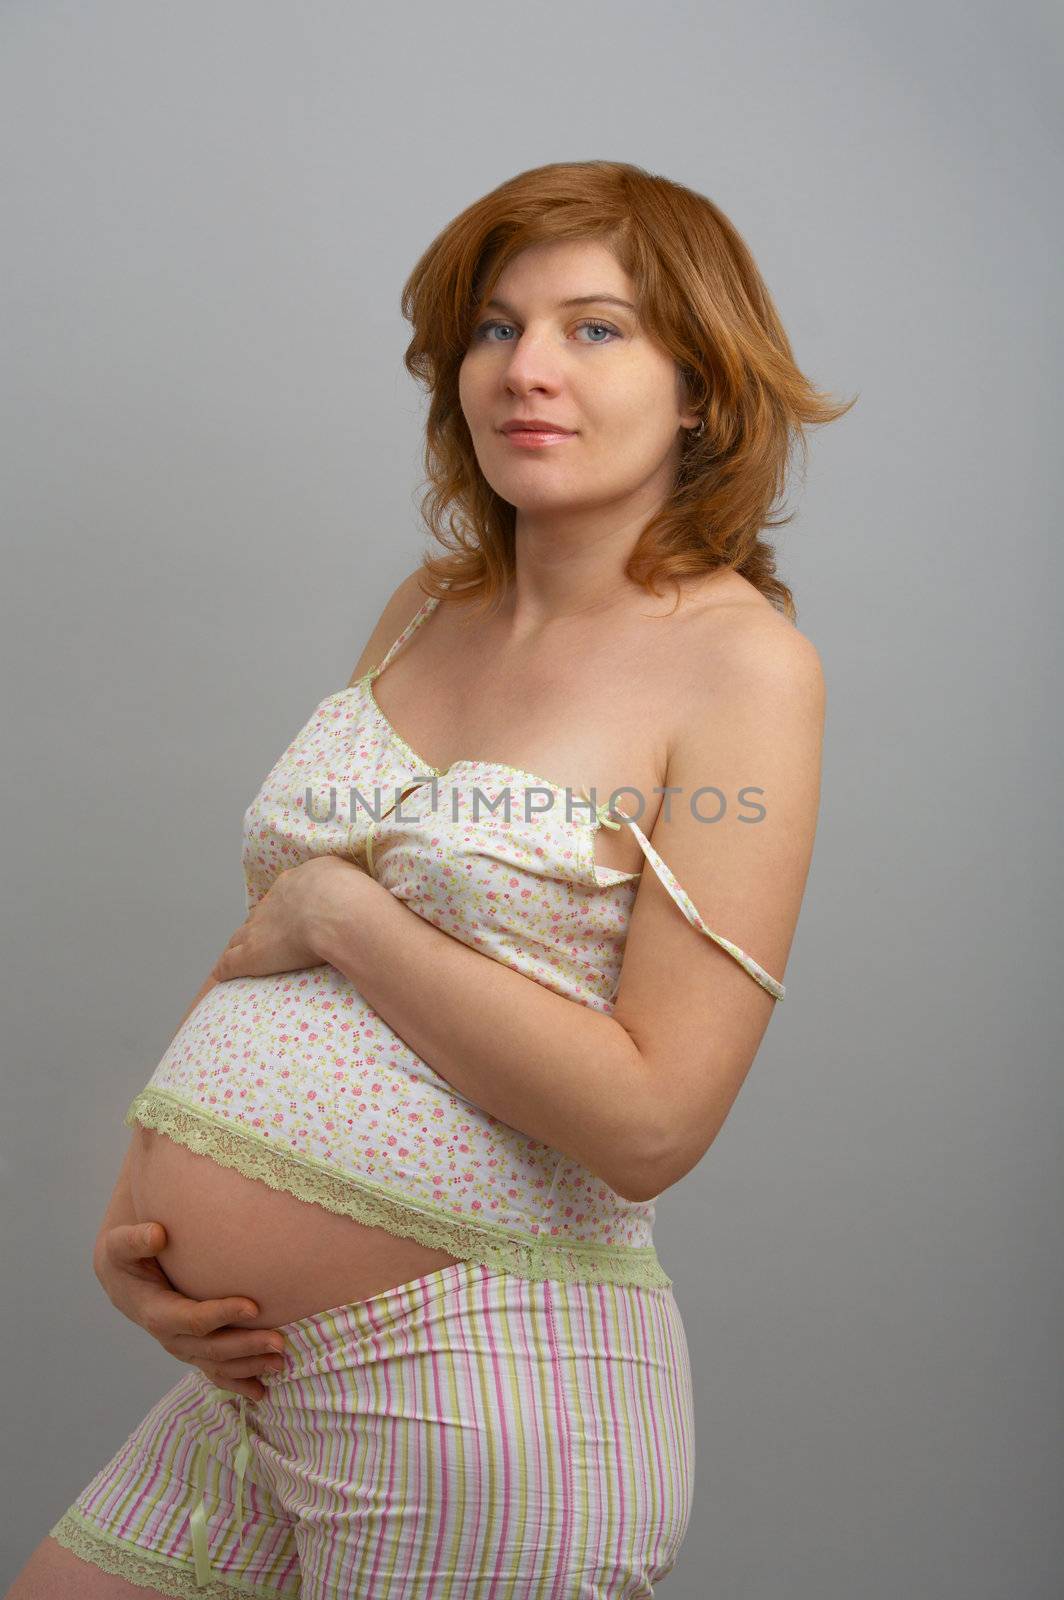 expectant mother with a pleased smile upon one's face